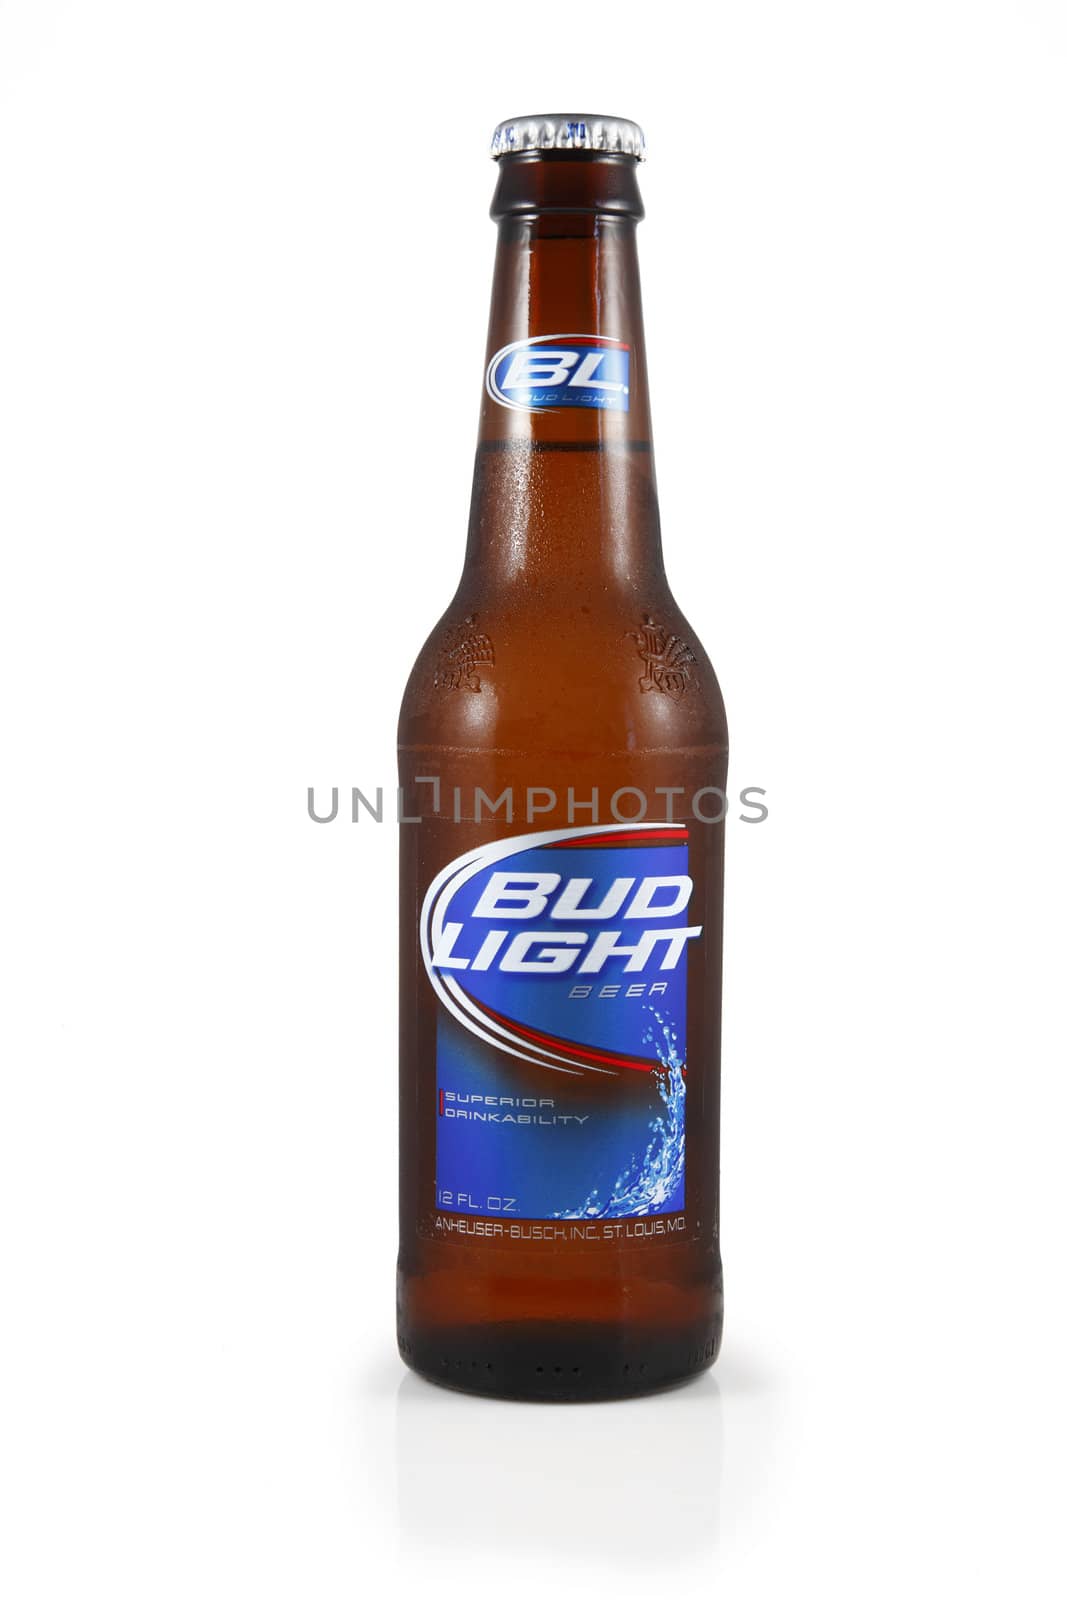 An isolated studio shot of a bottle of Bud Light Beer.